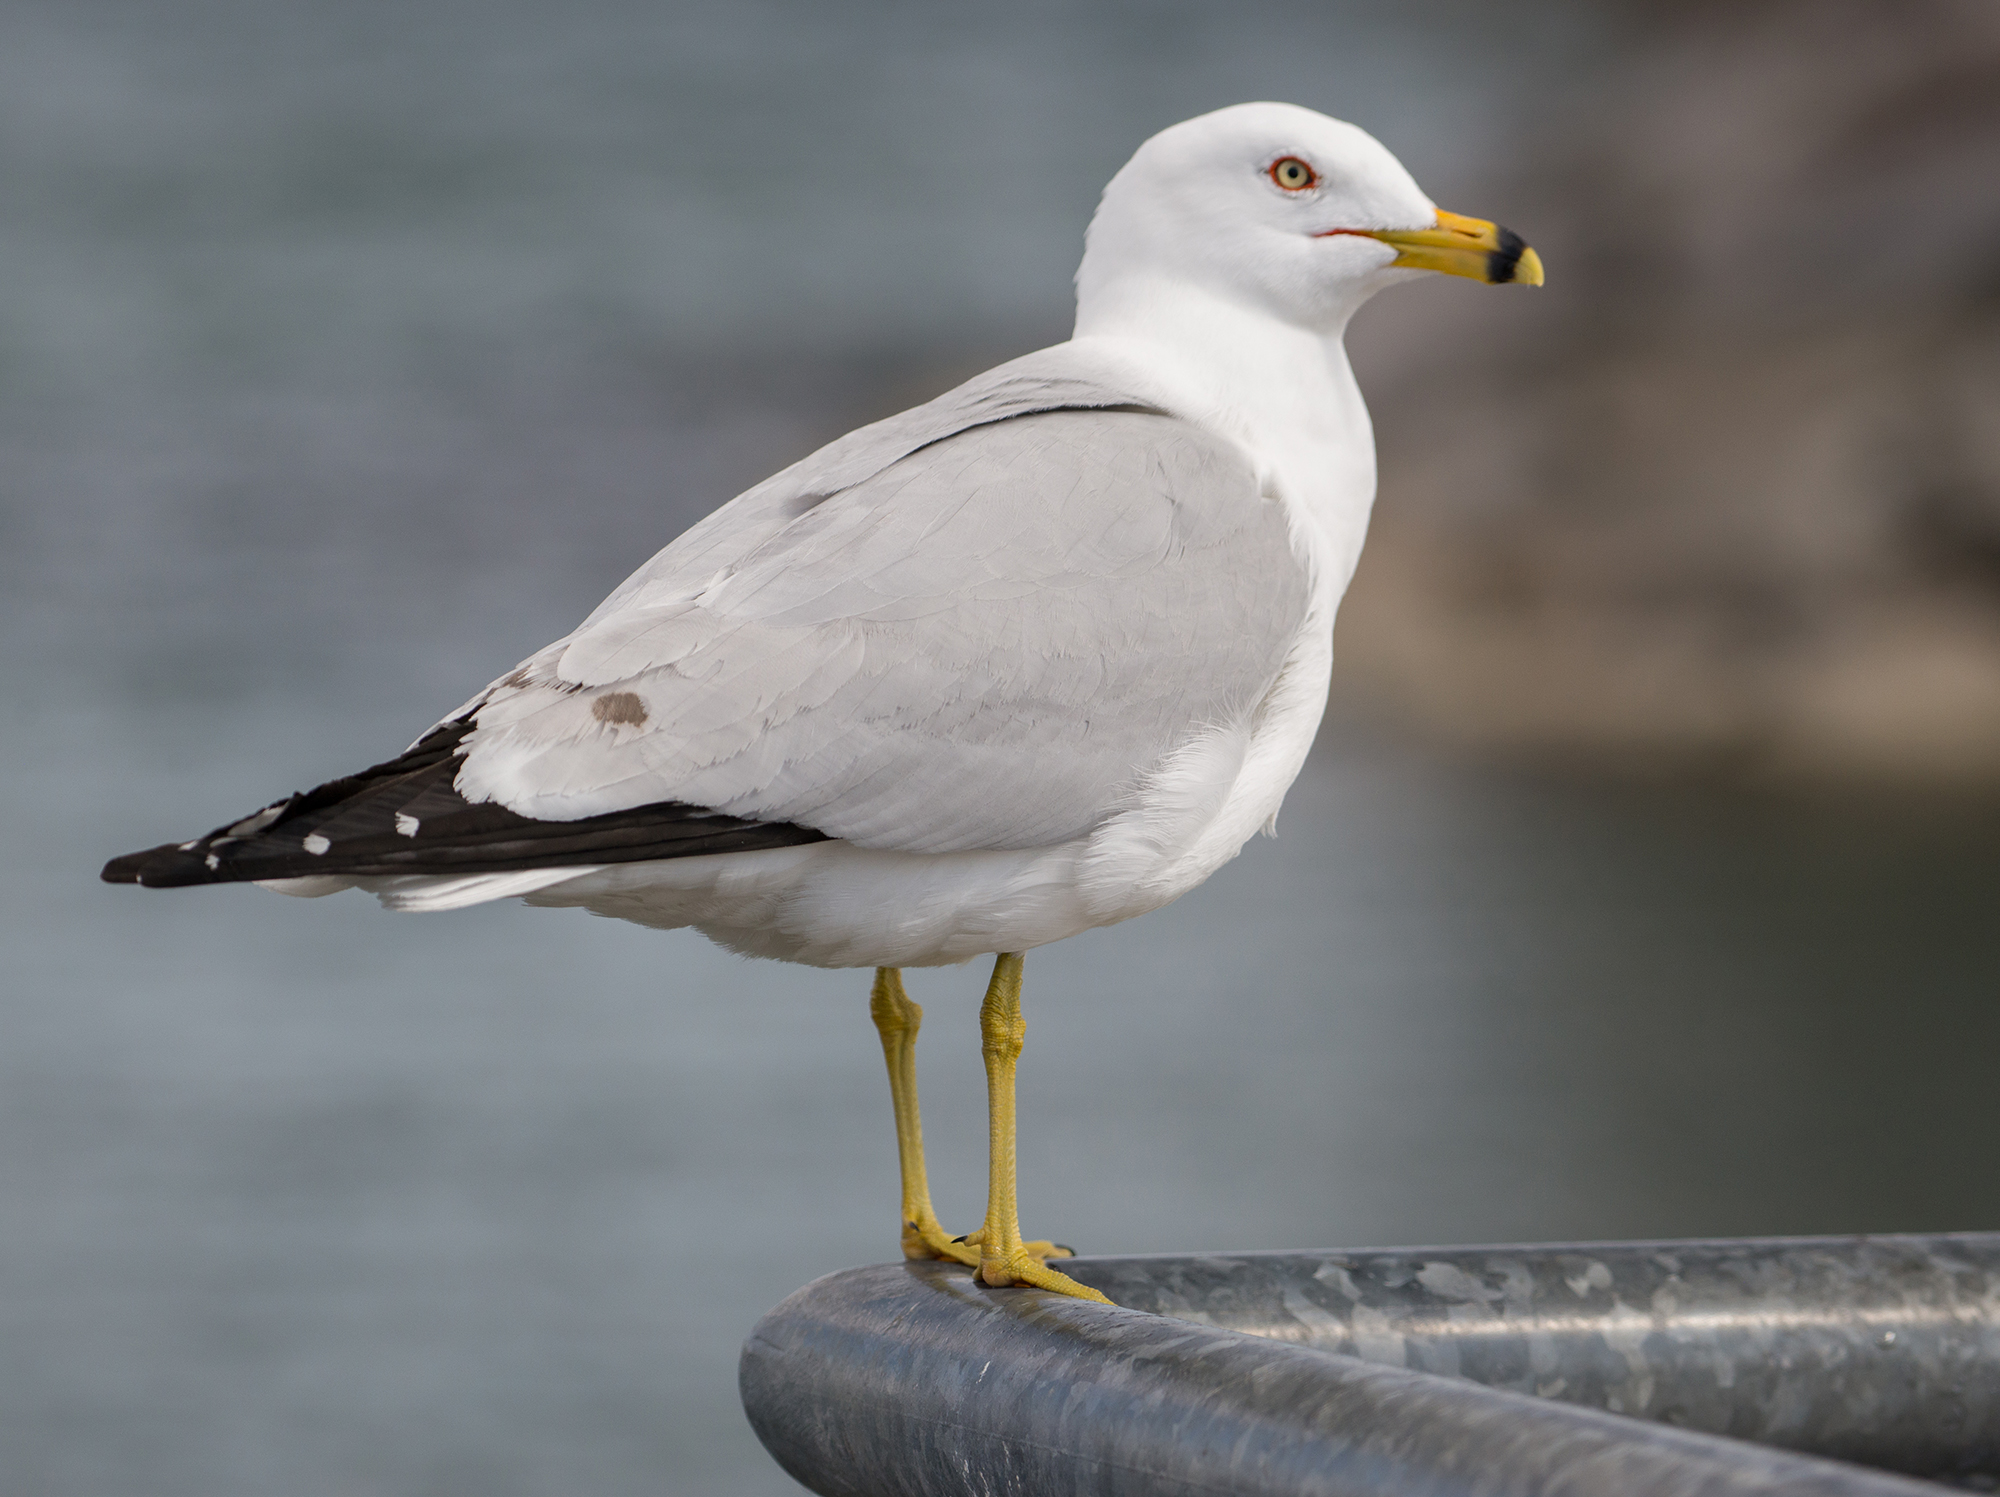 Grey and white ring-billed gull perched on a railing.